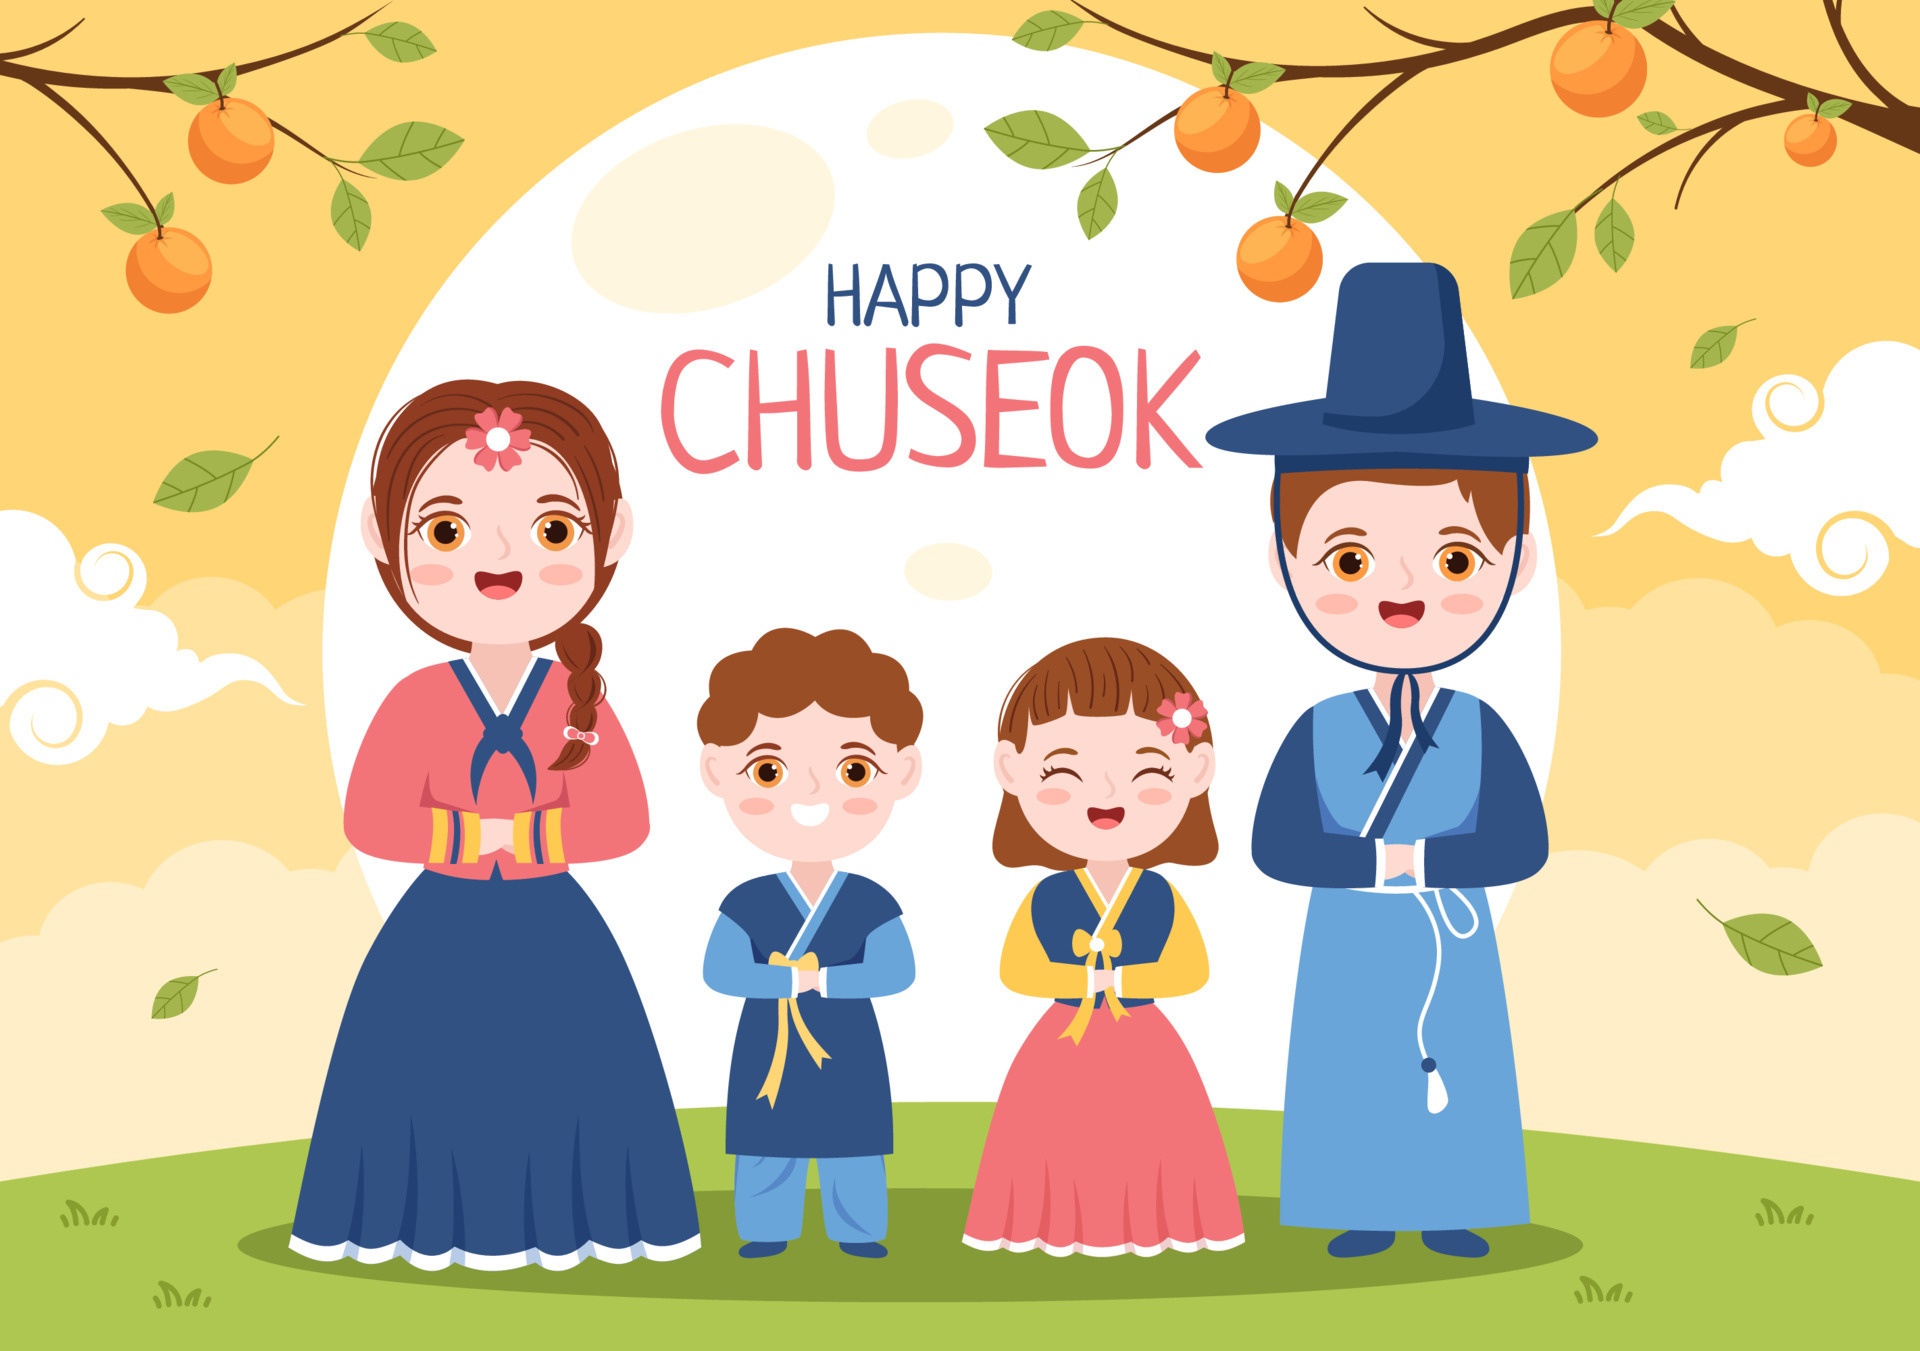 Happy Chuseok Day in Korea for Thanksgiving with People in Traditional